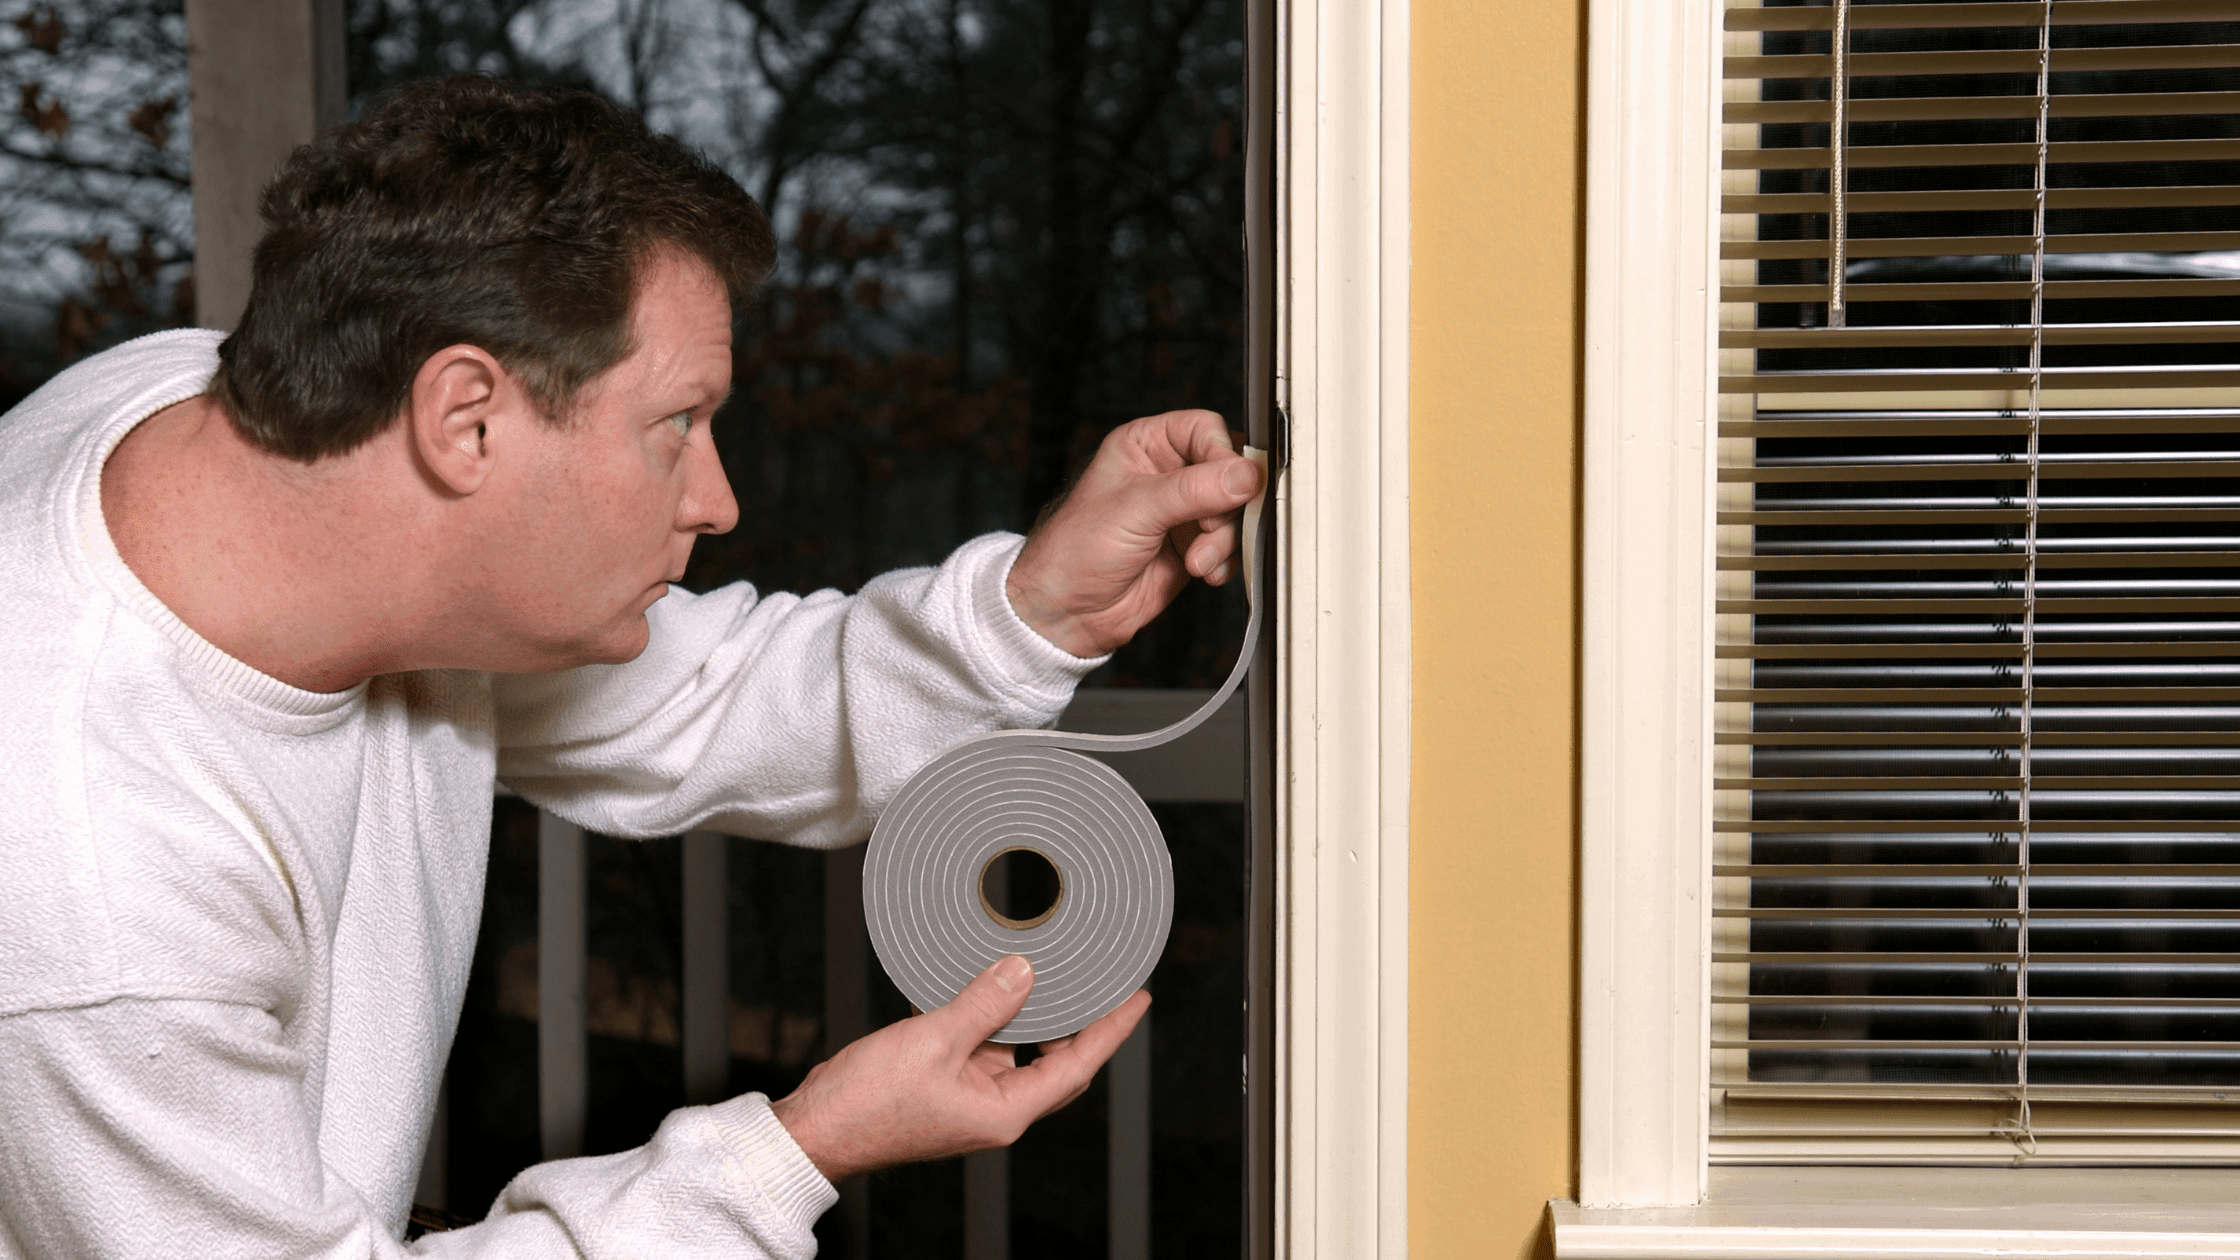 How To Weather Stripping Door Seal Strip: Step By Step Process